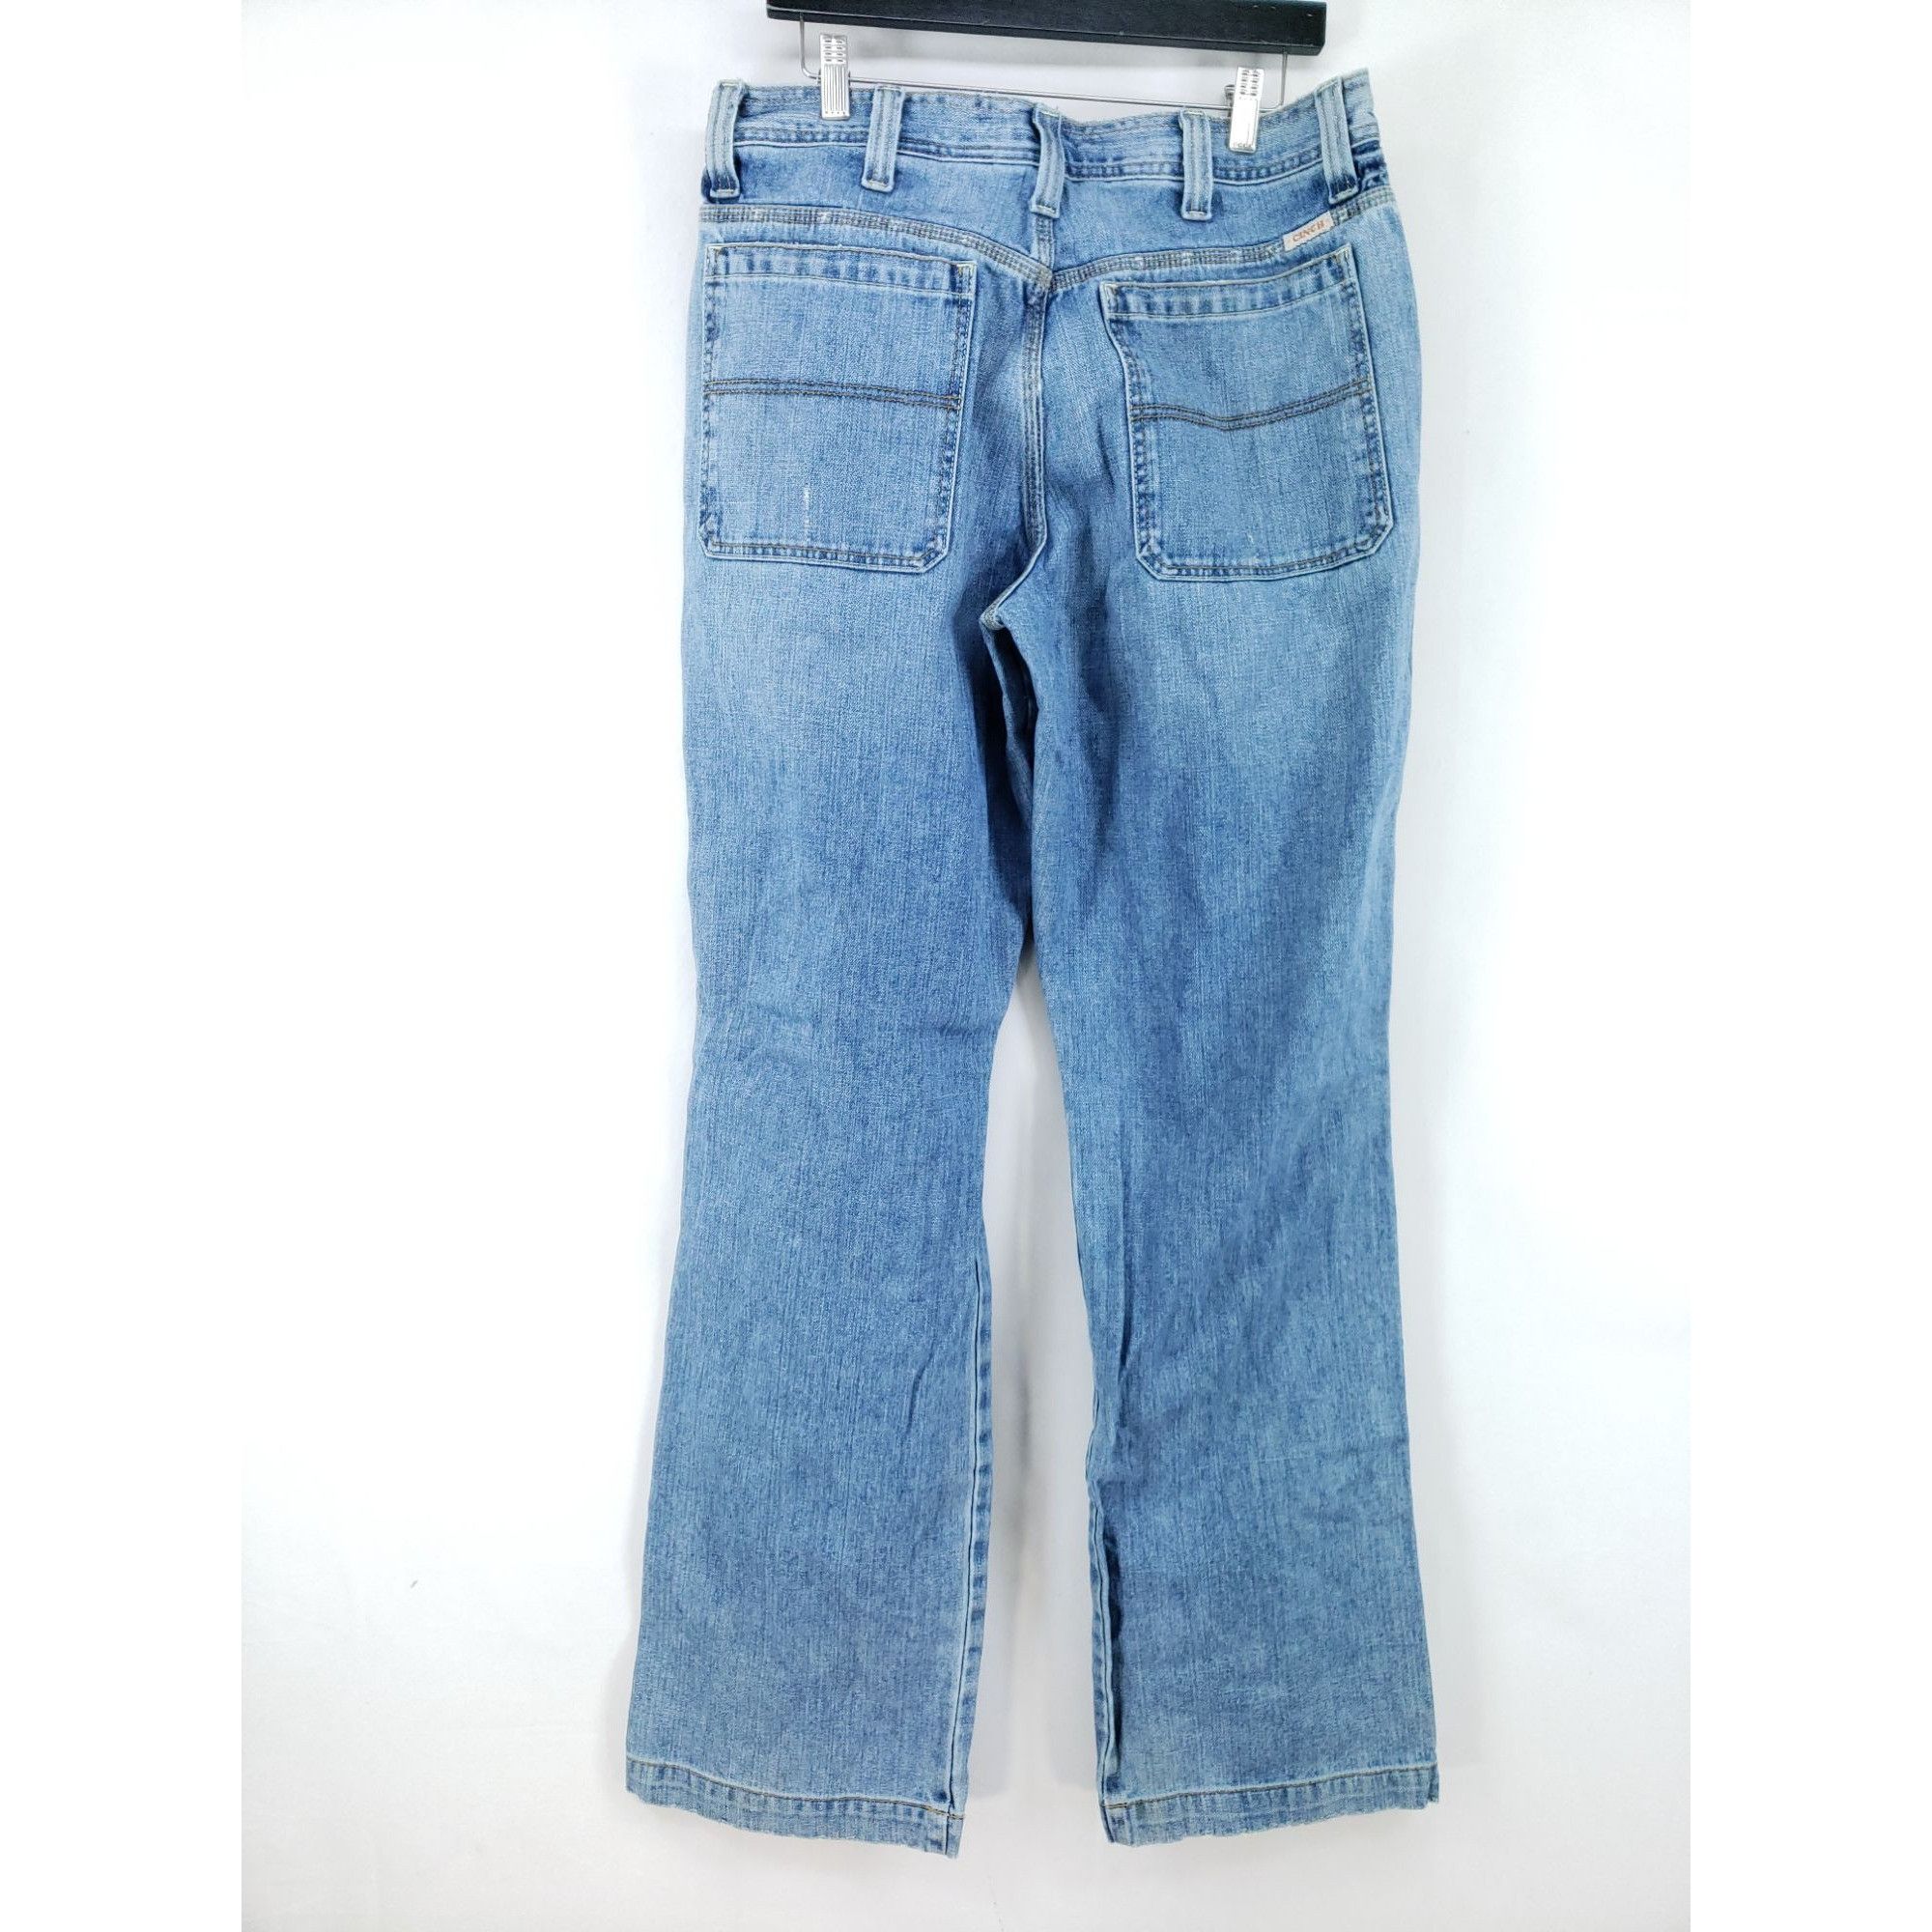 Cinch Cinch Relaxed Fit Jeans Men's Size 34/36 Distressed Light Size US 34 / EU 50 - 2 Preview